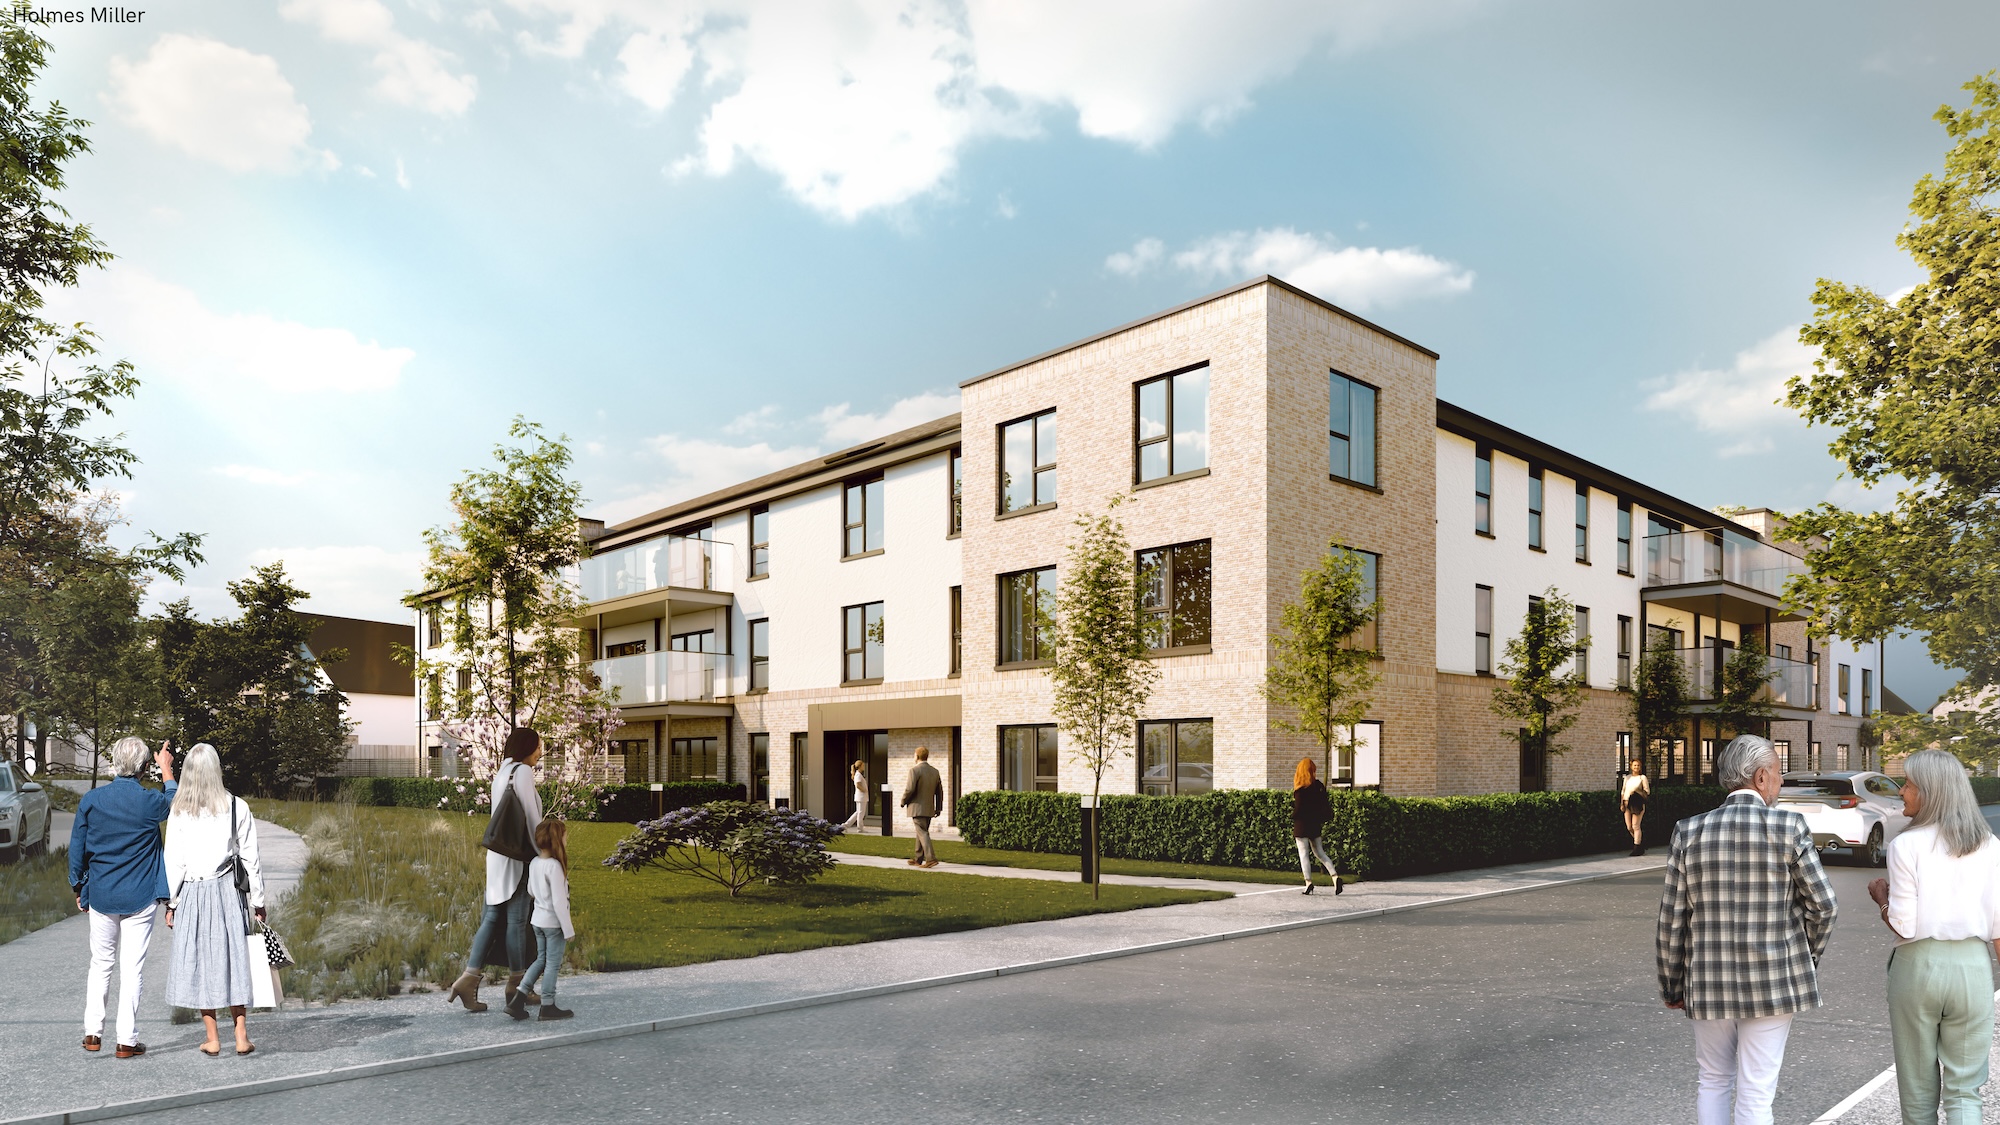 Edinburgh care developer receives third planning approval in a month